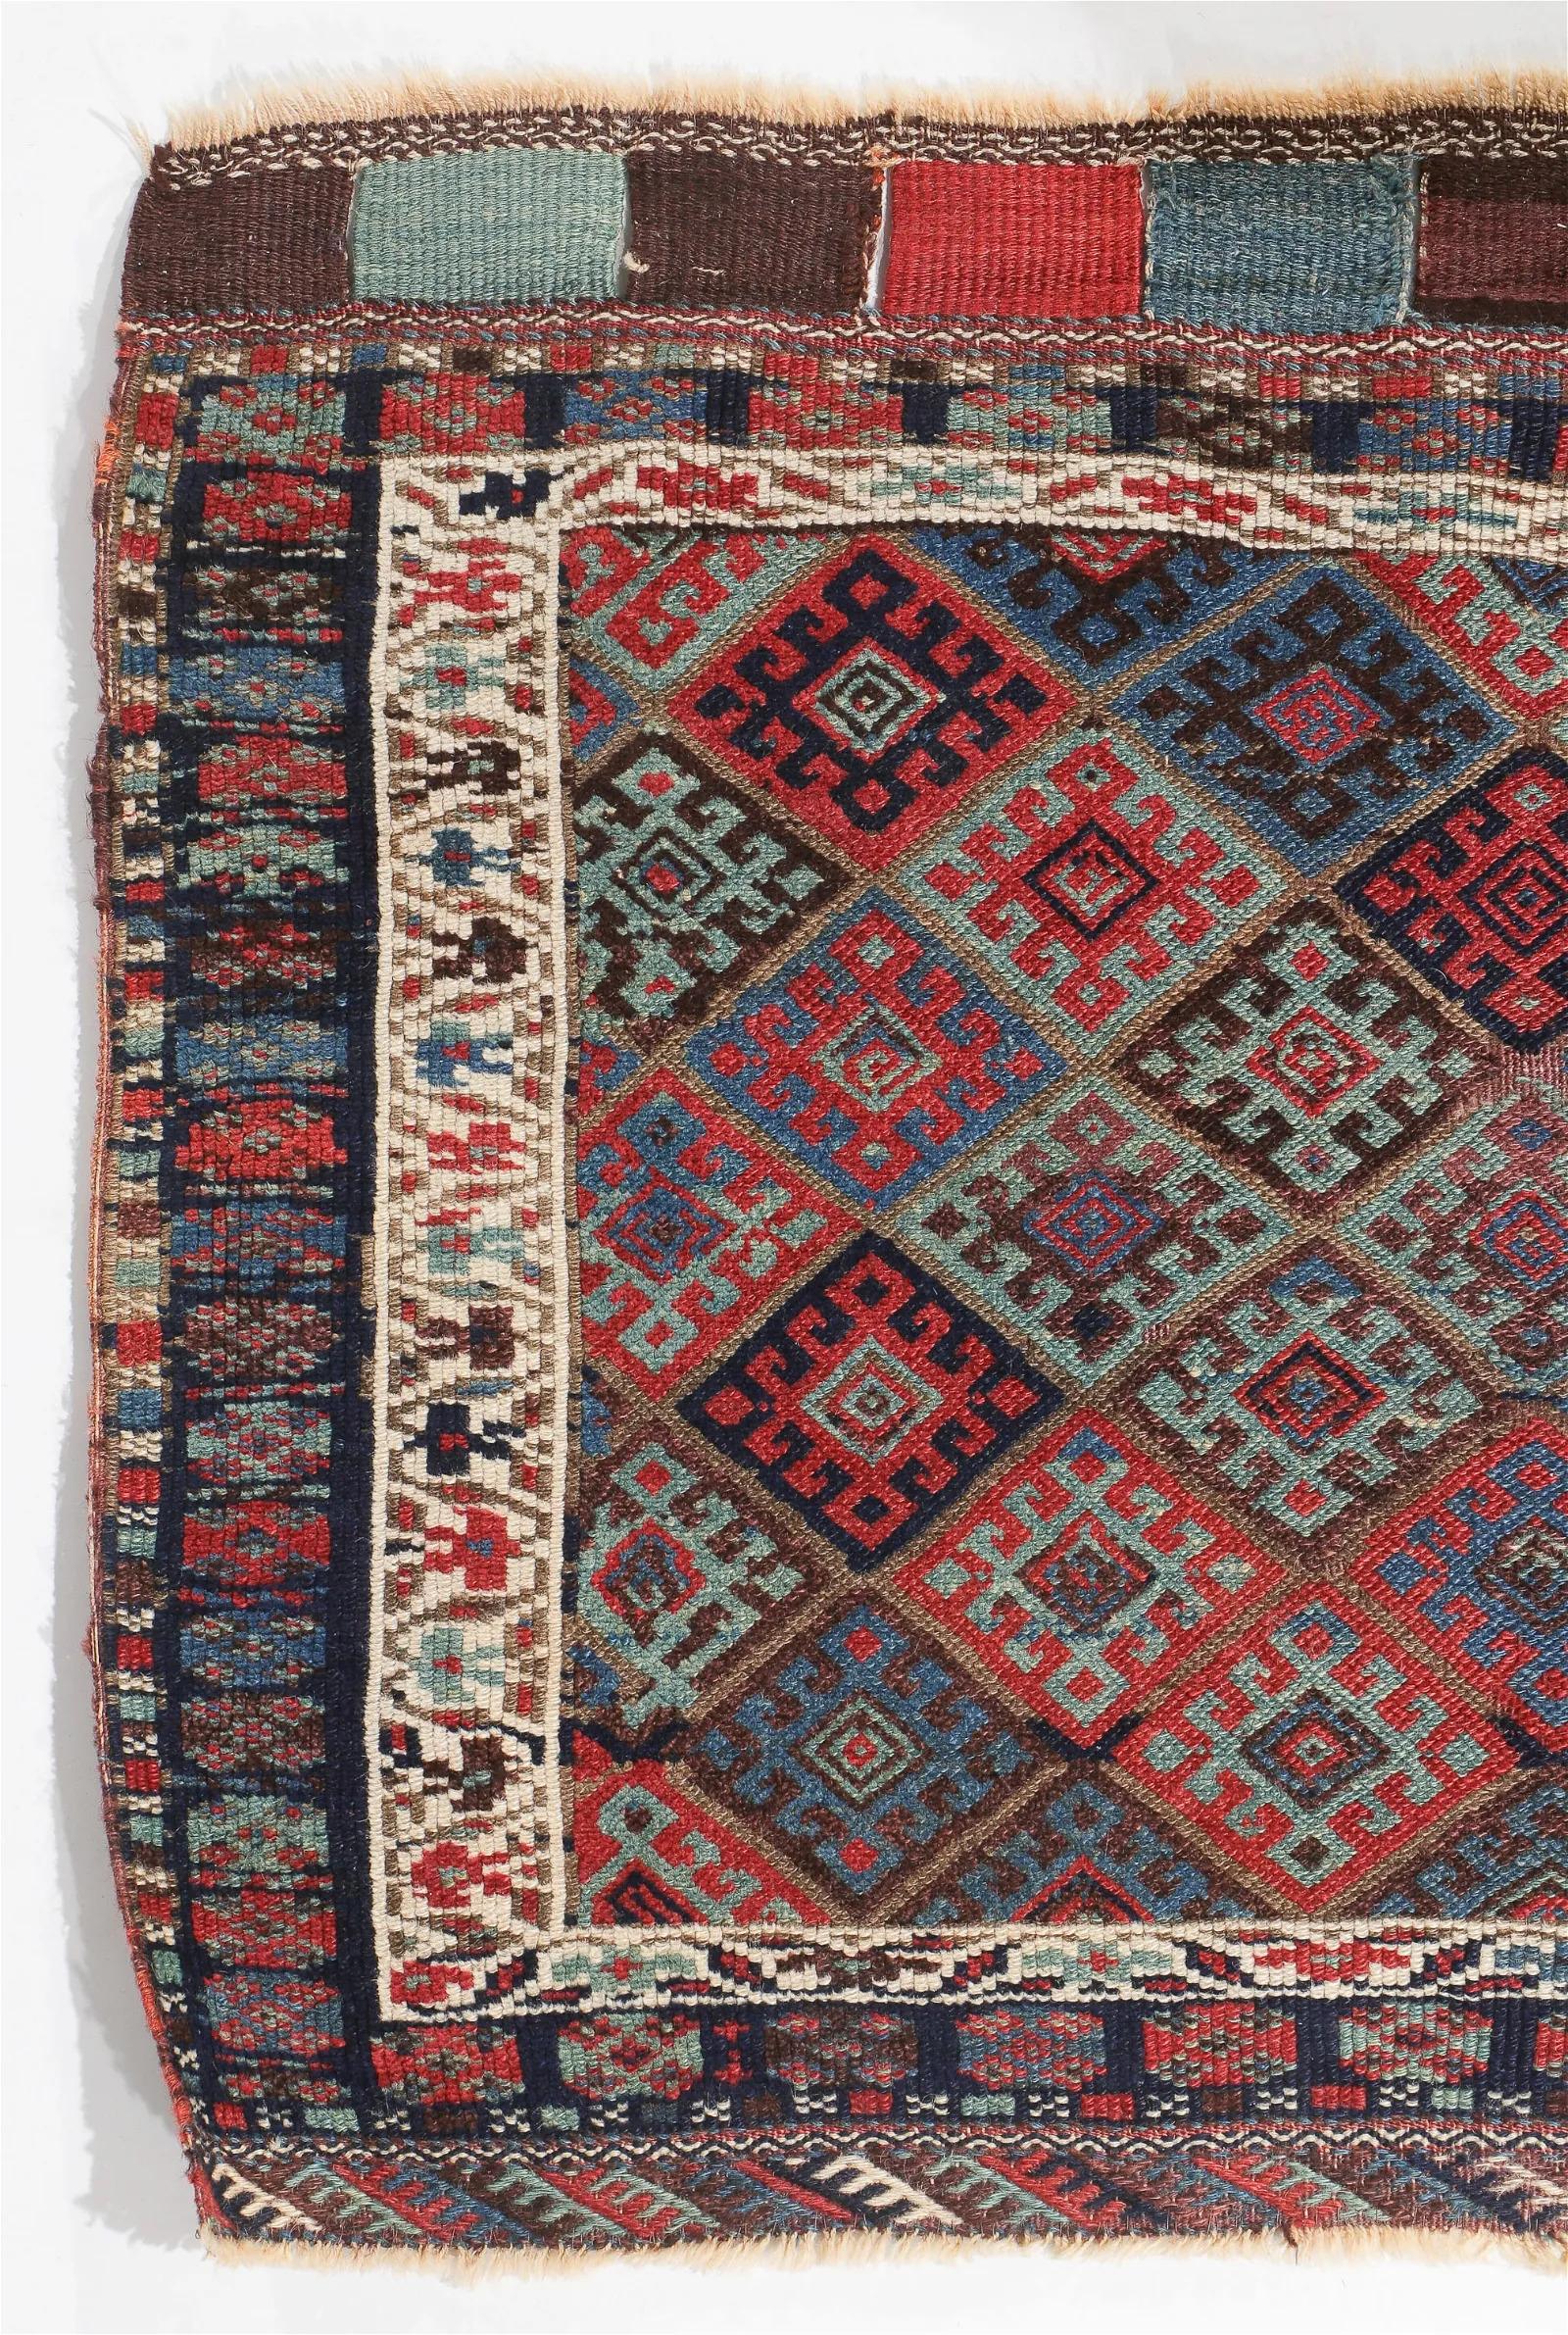 Transport yourself to the cultural heart of Persia with this Antique Jaff Kurd Bag Face, originating from the renowned weaving traditions of Persia. Dating back to circa 1875, this captivating rug measures 3 feet 3 inches in width and 2 feet 9